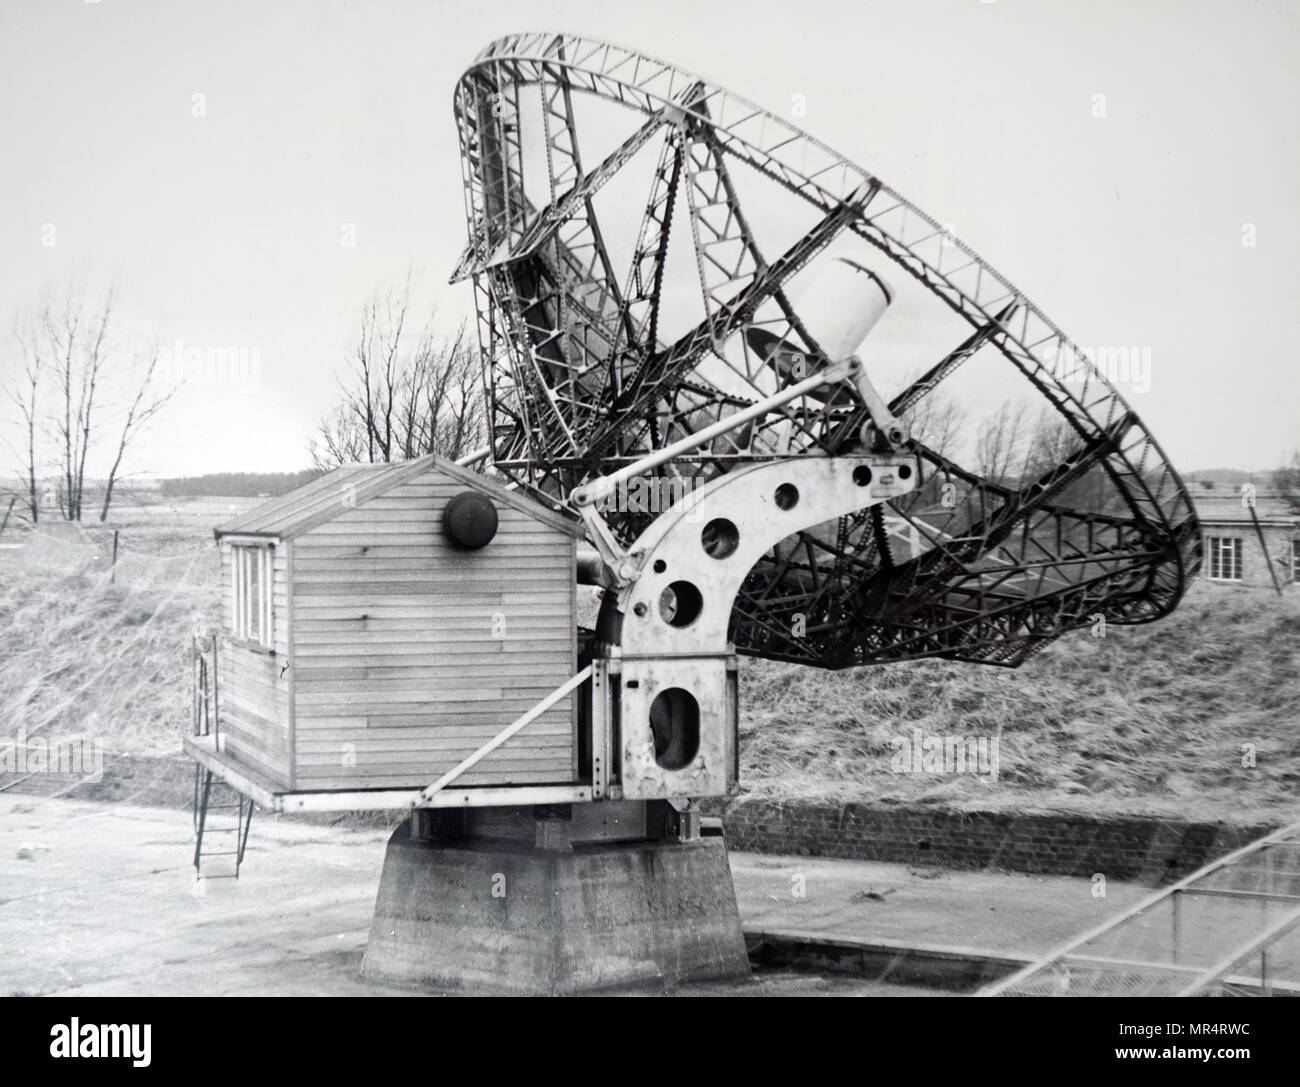 Photograph of a steerable paraboloid with reflecting netting on the ground, constructed from World War Two radar equipment, located at the Mullard Radio Astronomy Observatory. Dated 20th century Stock Photo